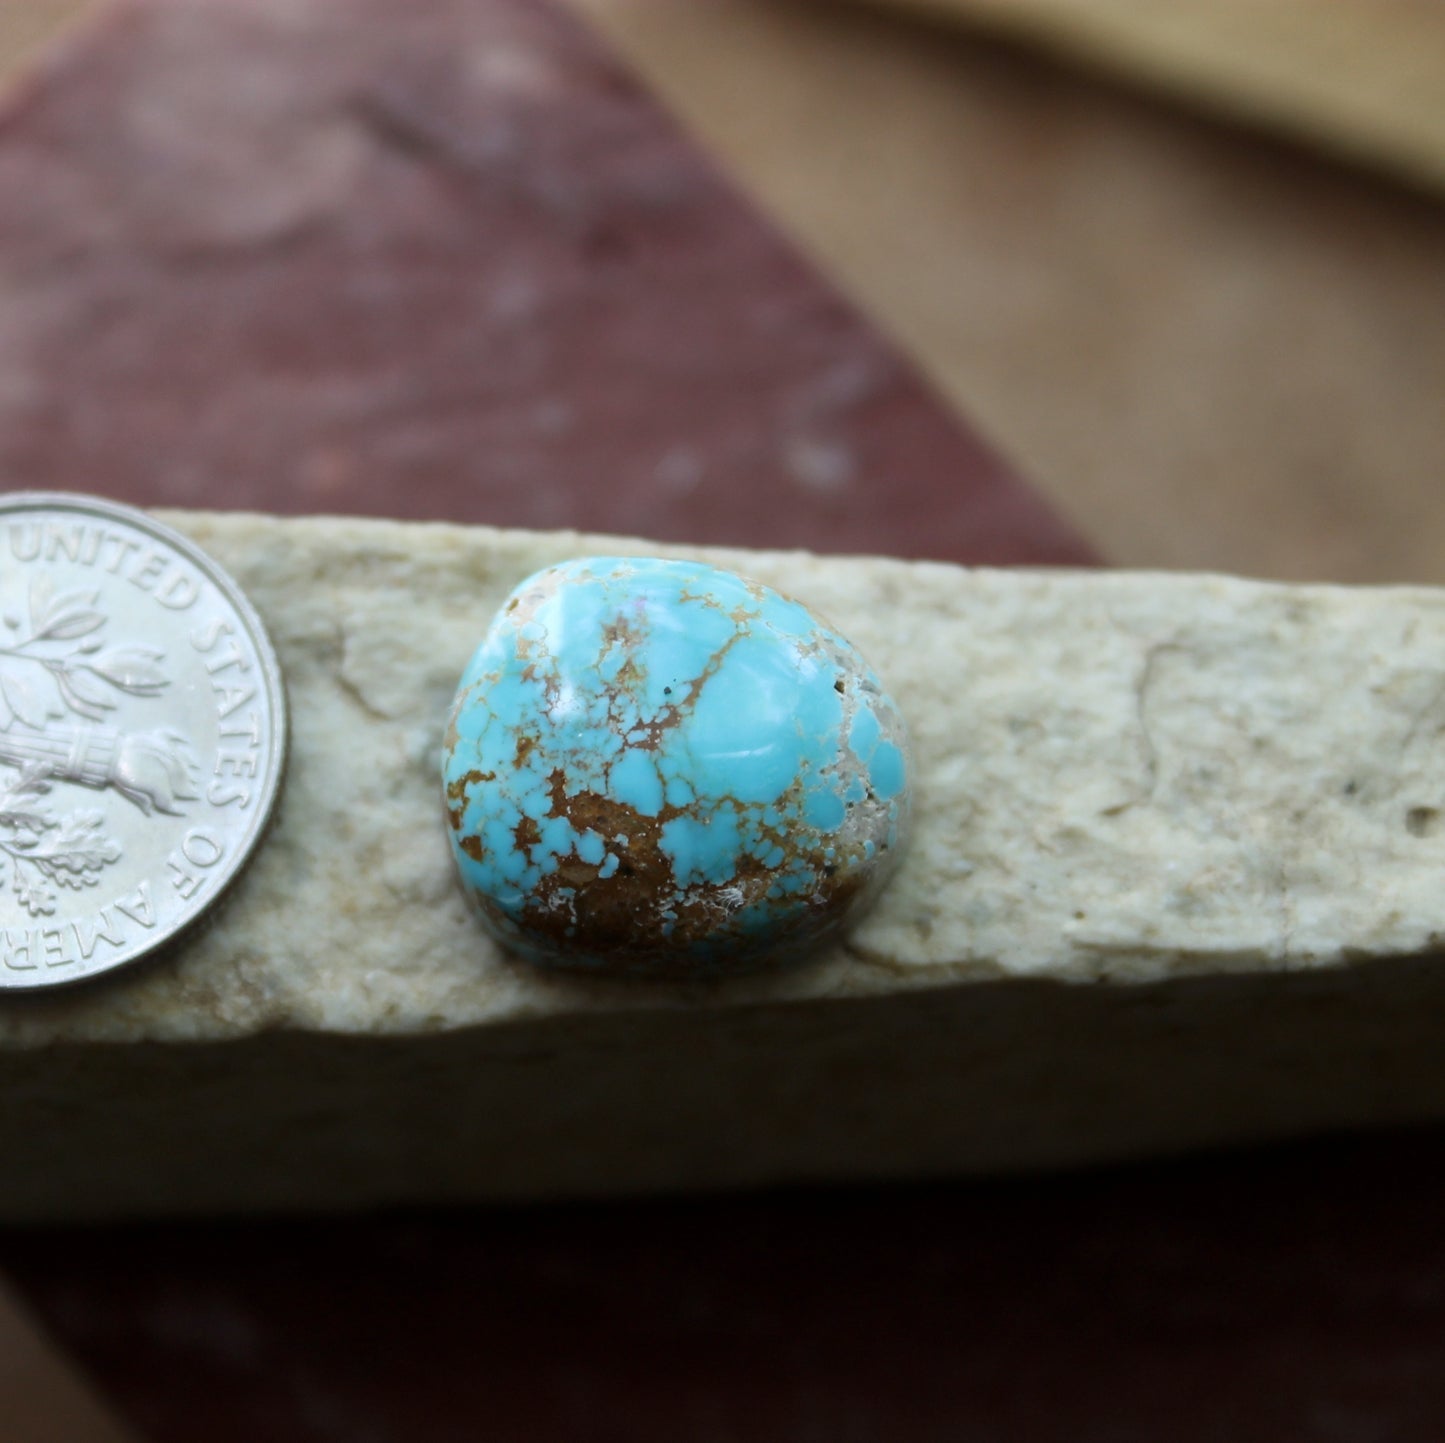 12 carat blue Stone Mountain Turquoise cabochon with a high dome